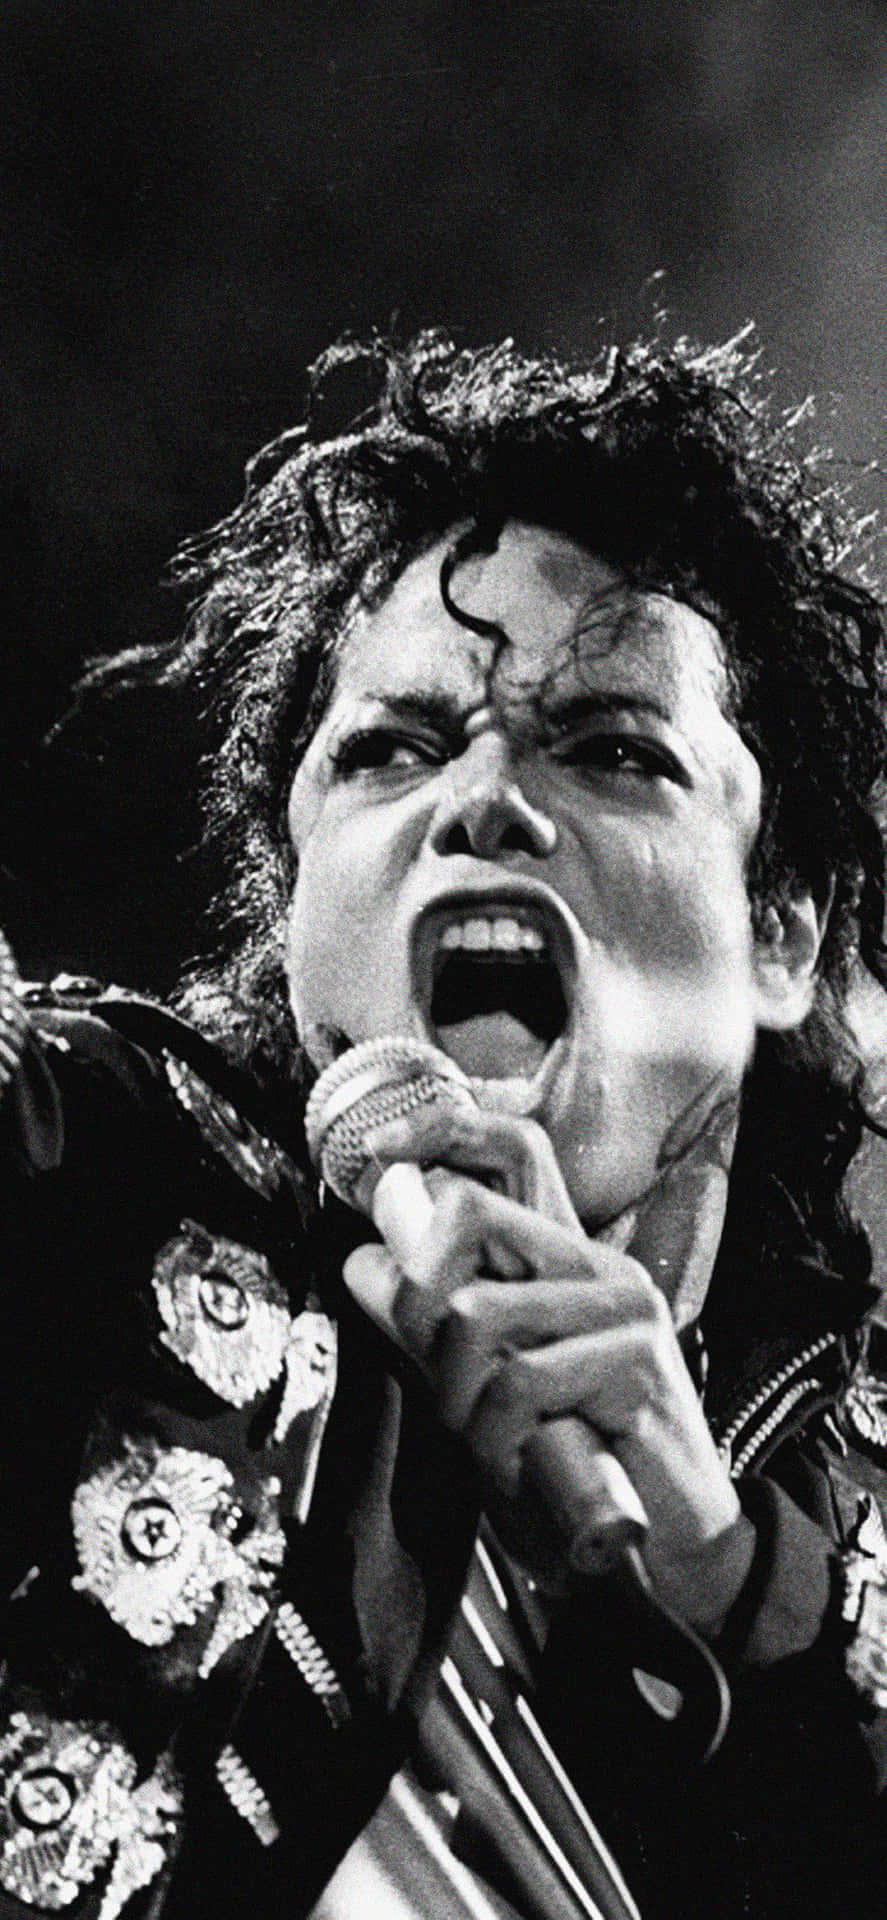 Legendary Michael Jackson on iPhone – Dance into the groove of music. Wallpaper